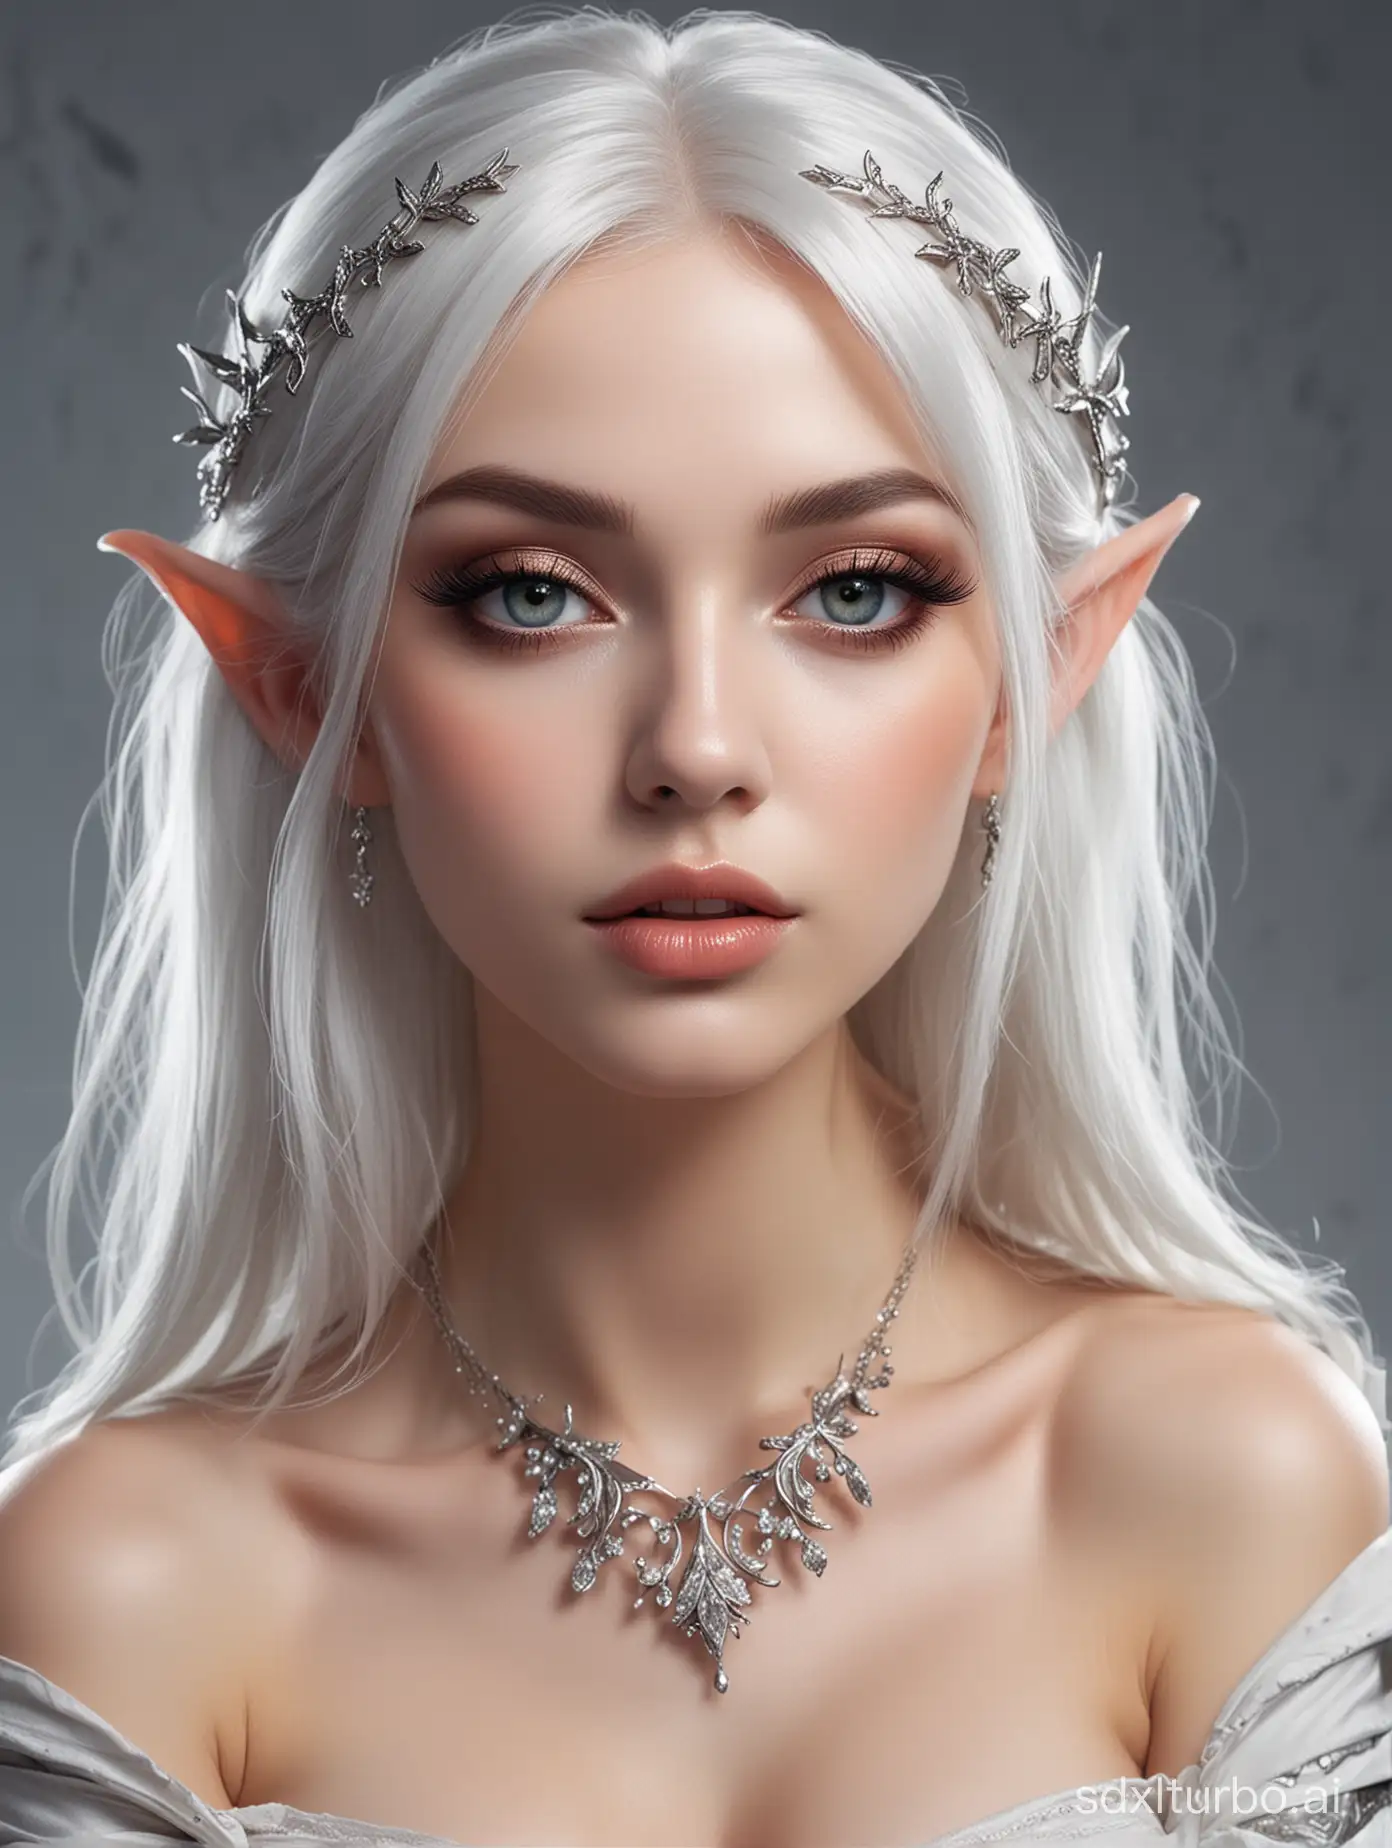 Seductive White Haired Elf, Delicate Makeup, Alluring Pose